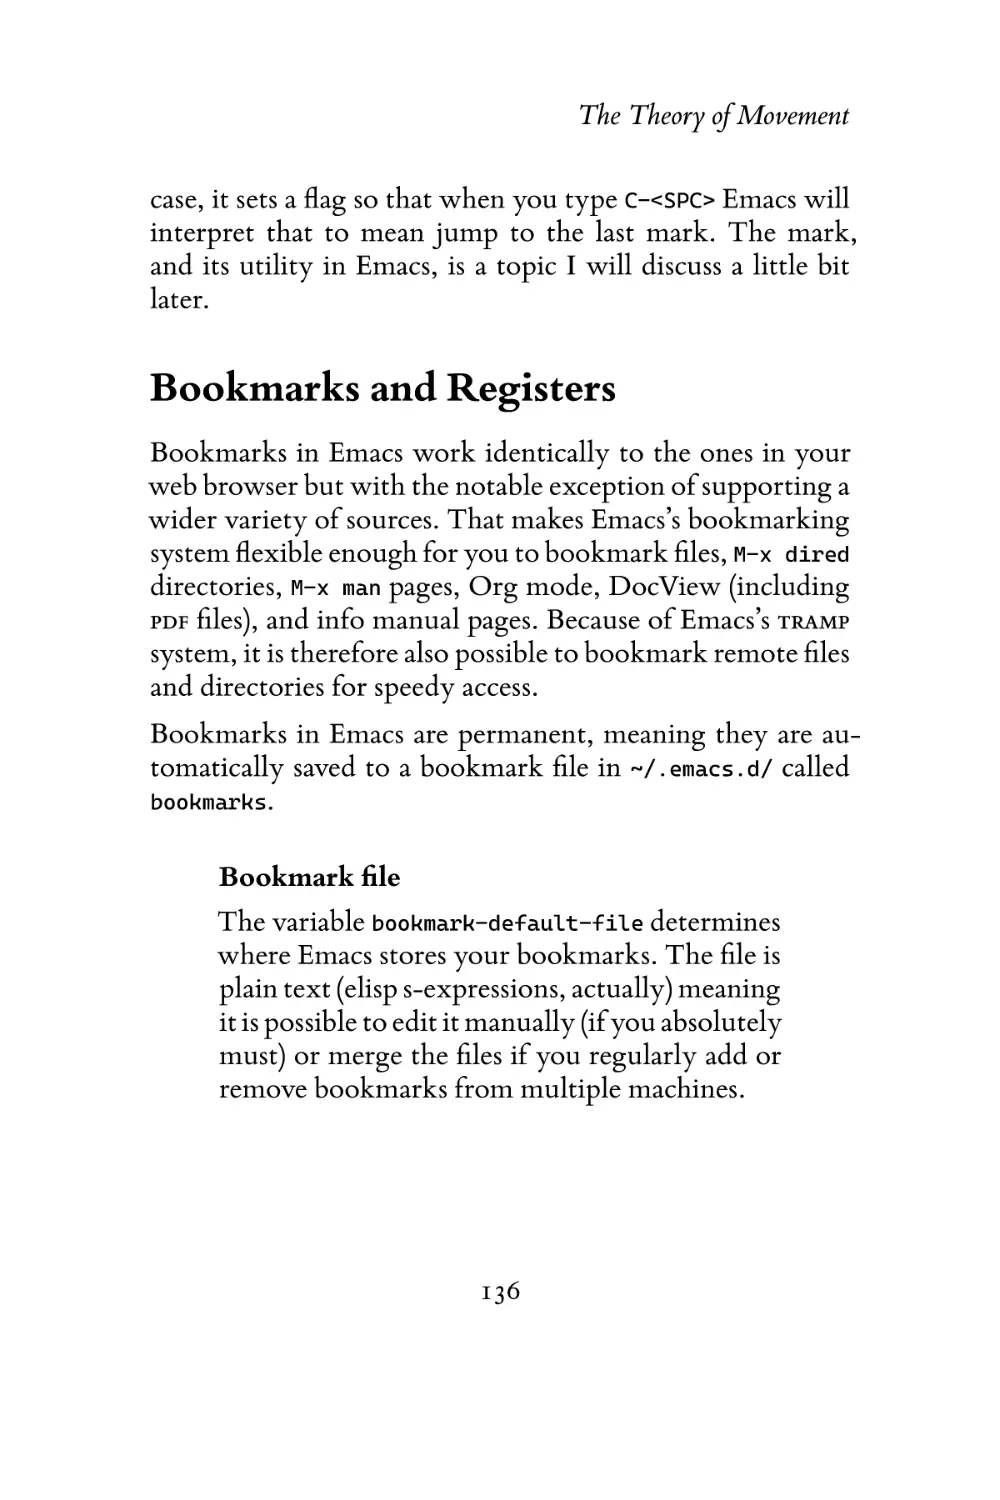 Bookmarks and Registers